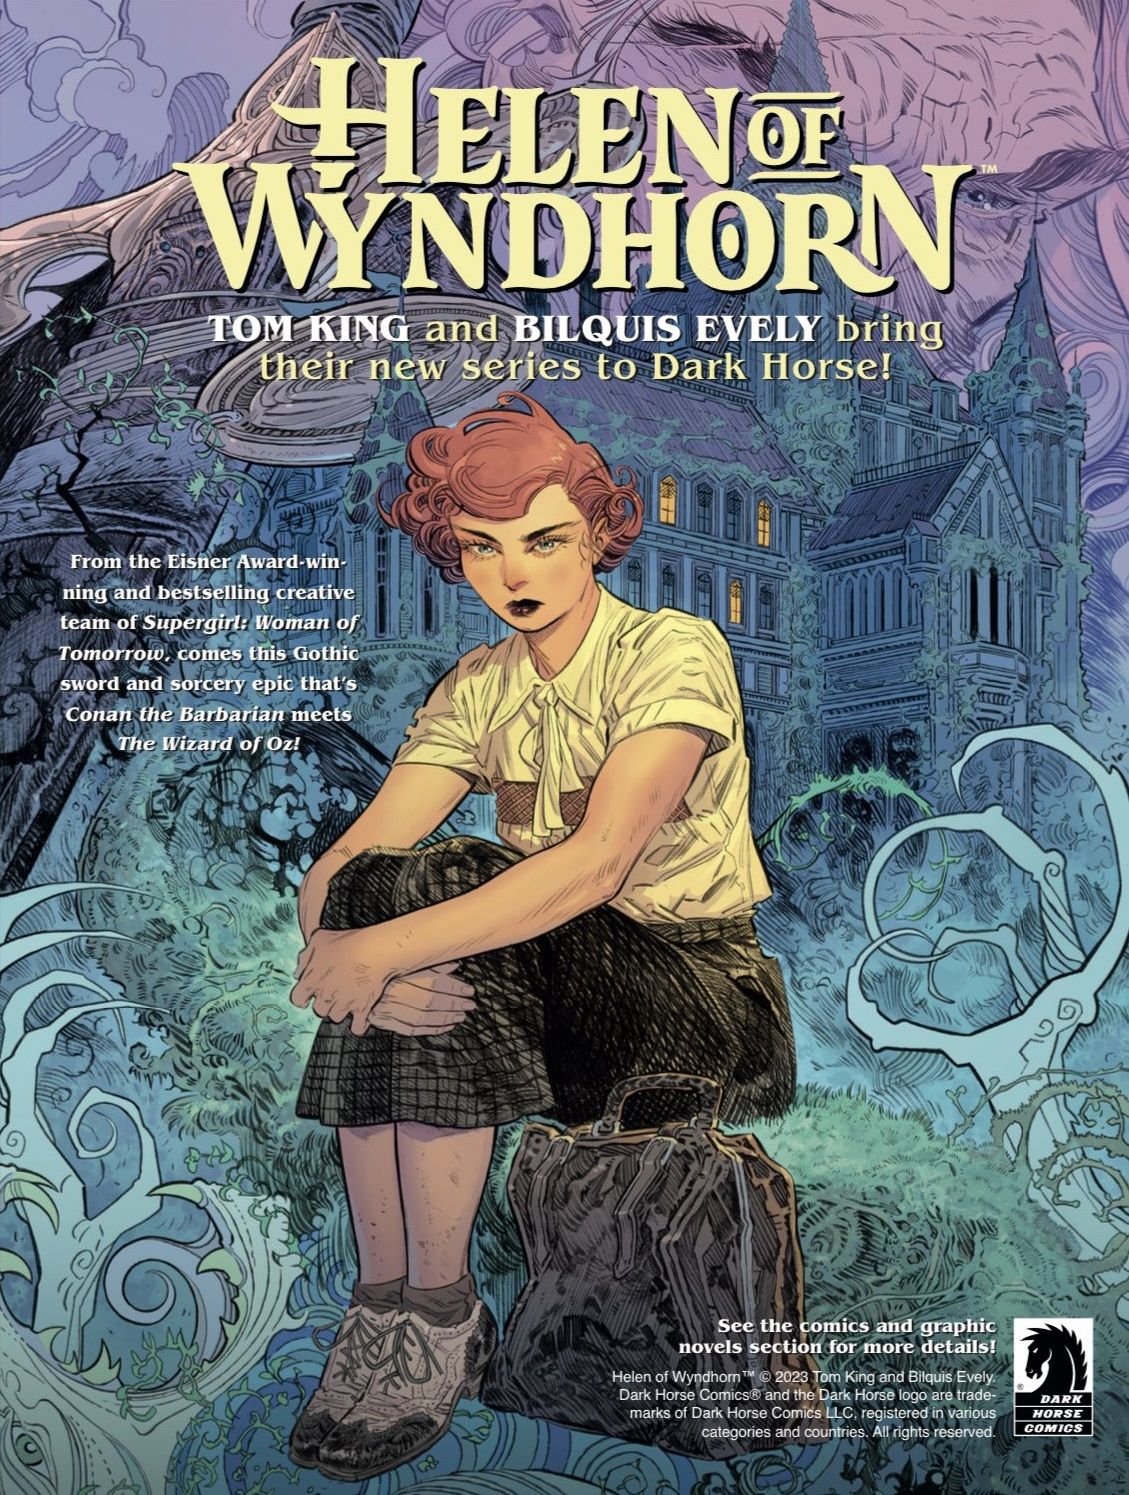 The cover to Helen of Wyndhorn: Helen, a young woman, sits atop a stone before an old, mist-shrouded mansion while trees reach out like fingers.